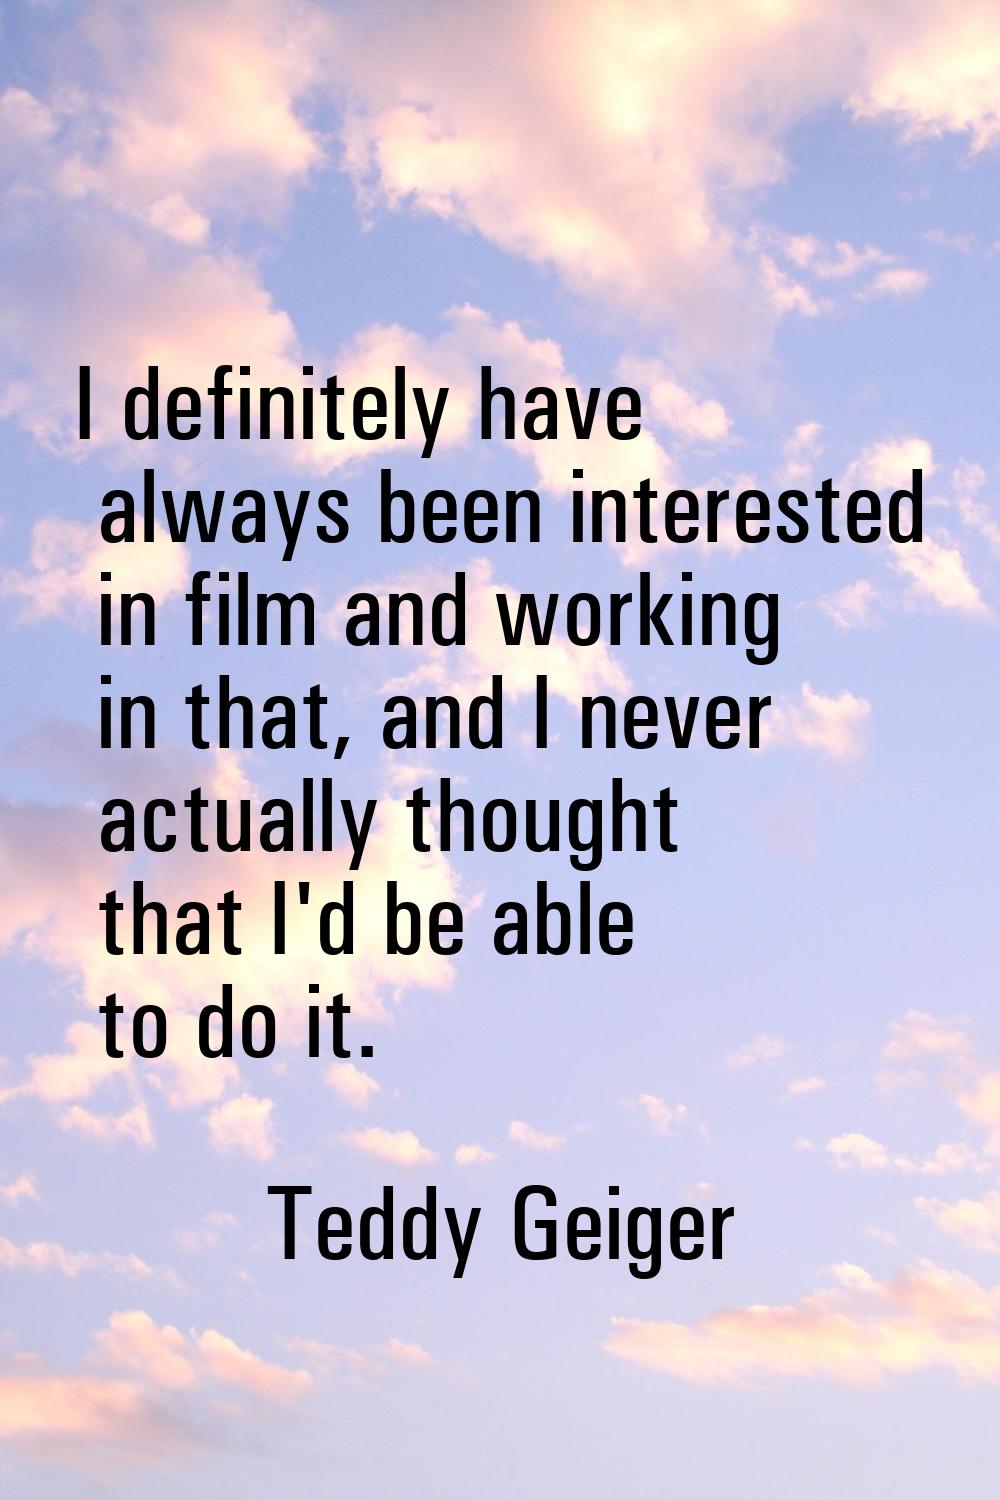 I definitely have always been interested in film and working in that, and I never actually thought 